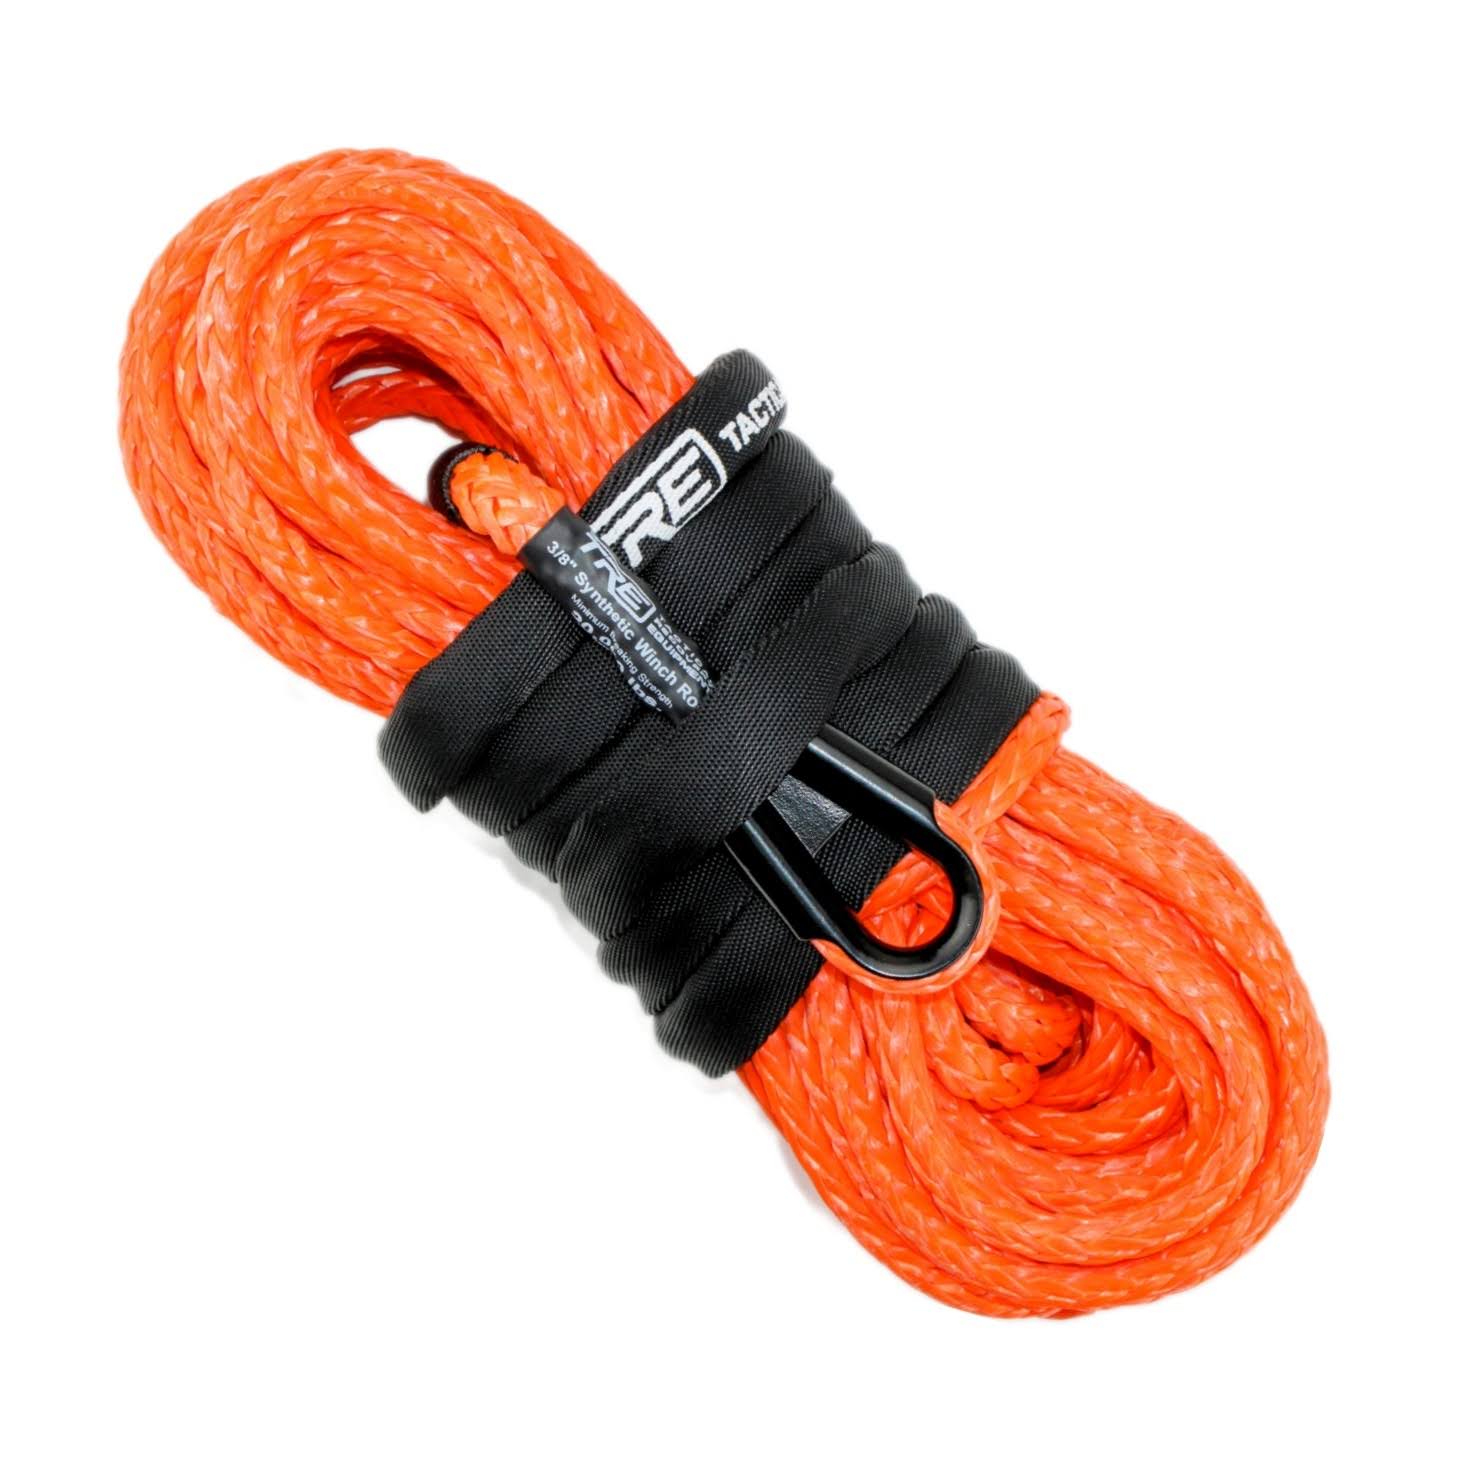 3/8 Synthetic Winch Rope - 20,000 lb. Breaking Strength - Replacement Winch Rope for 6,000 - 12,000 lb. Winches (Winch Rope Color: Orange, Winch Rope